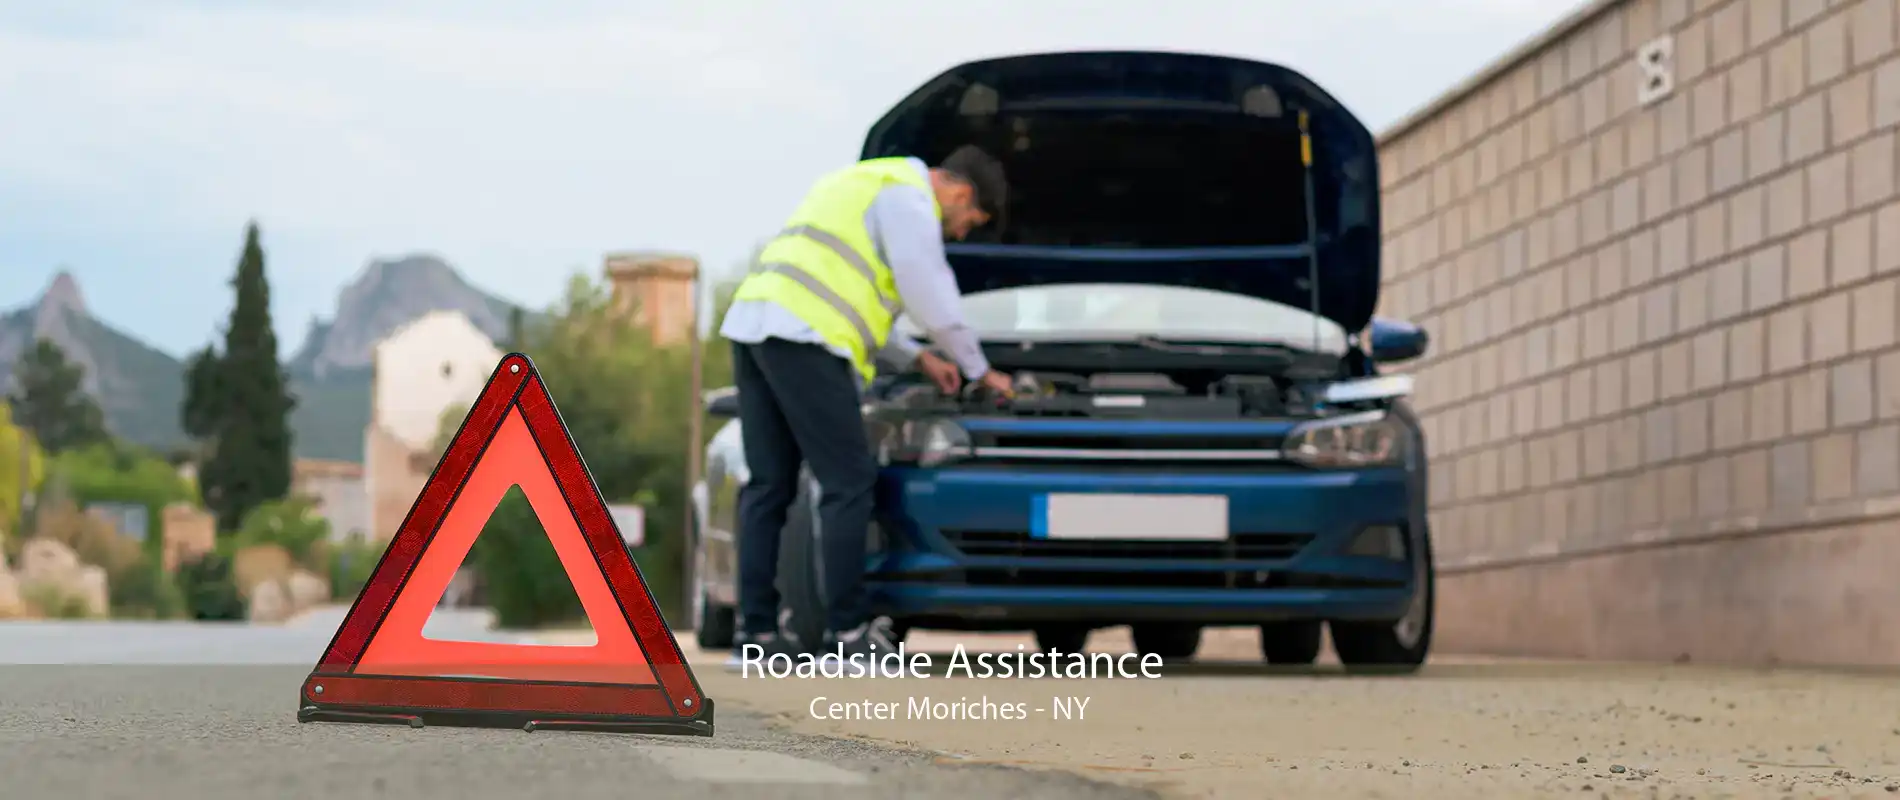 Roadside Assistance Center Moriches - NY